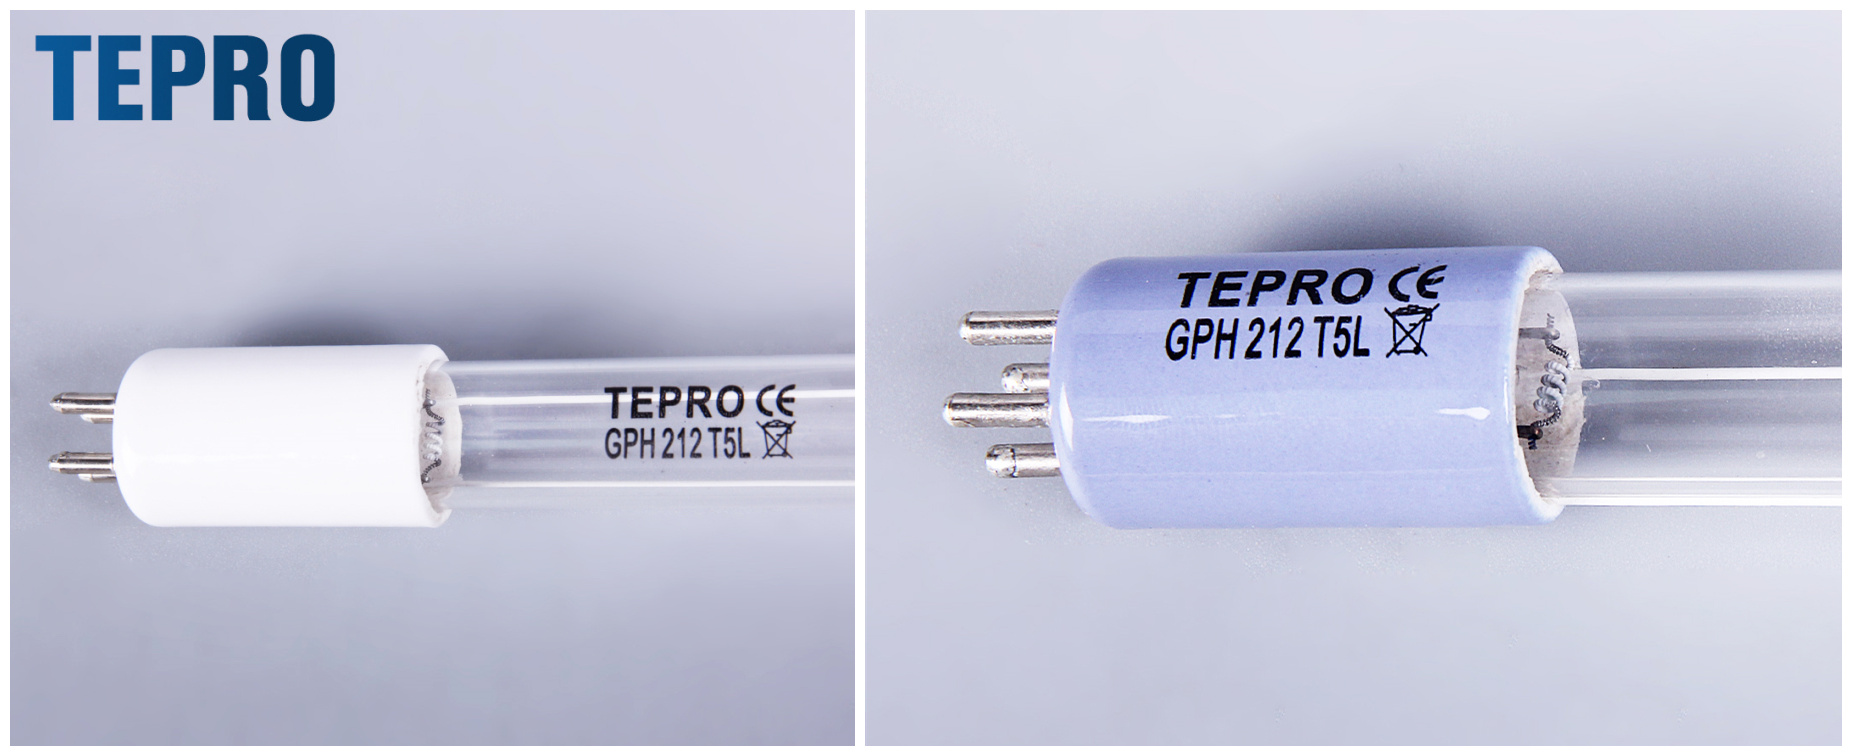 Tepro-What Is The Difference Between Ceramic And Plastic Lamp Holder